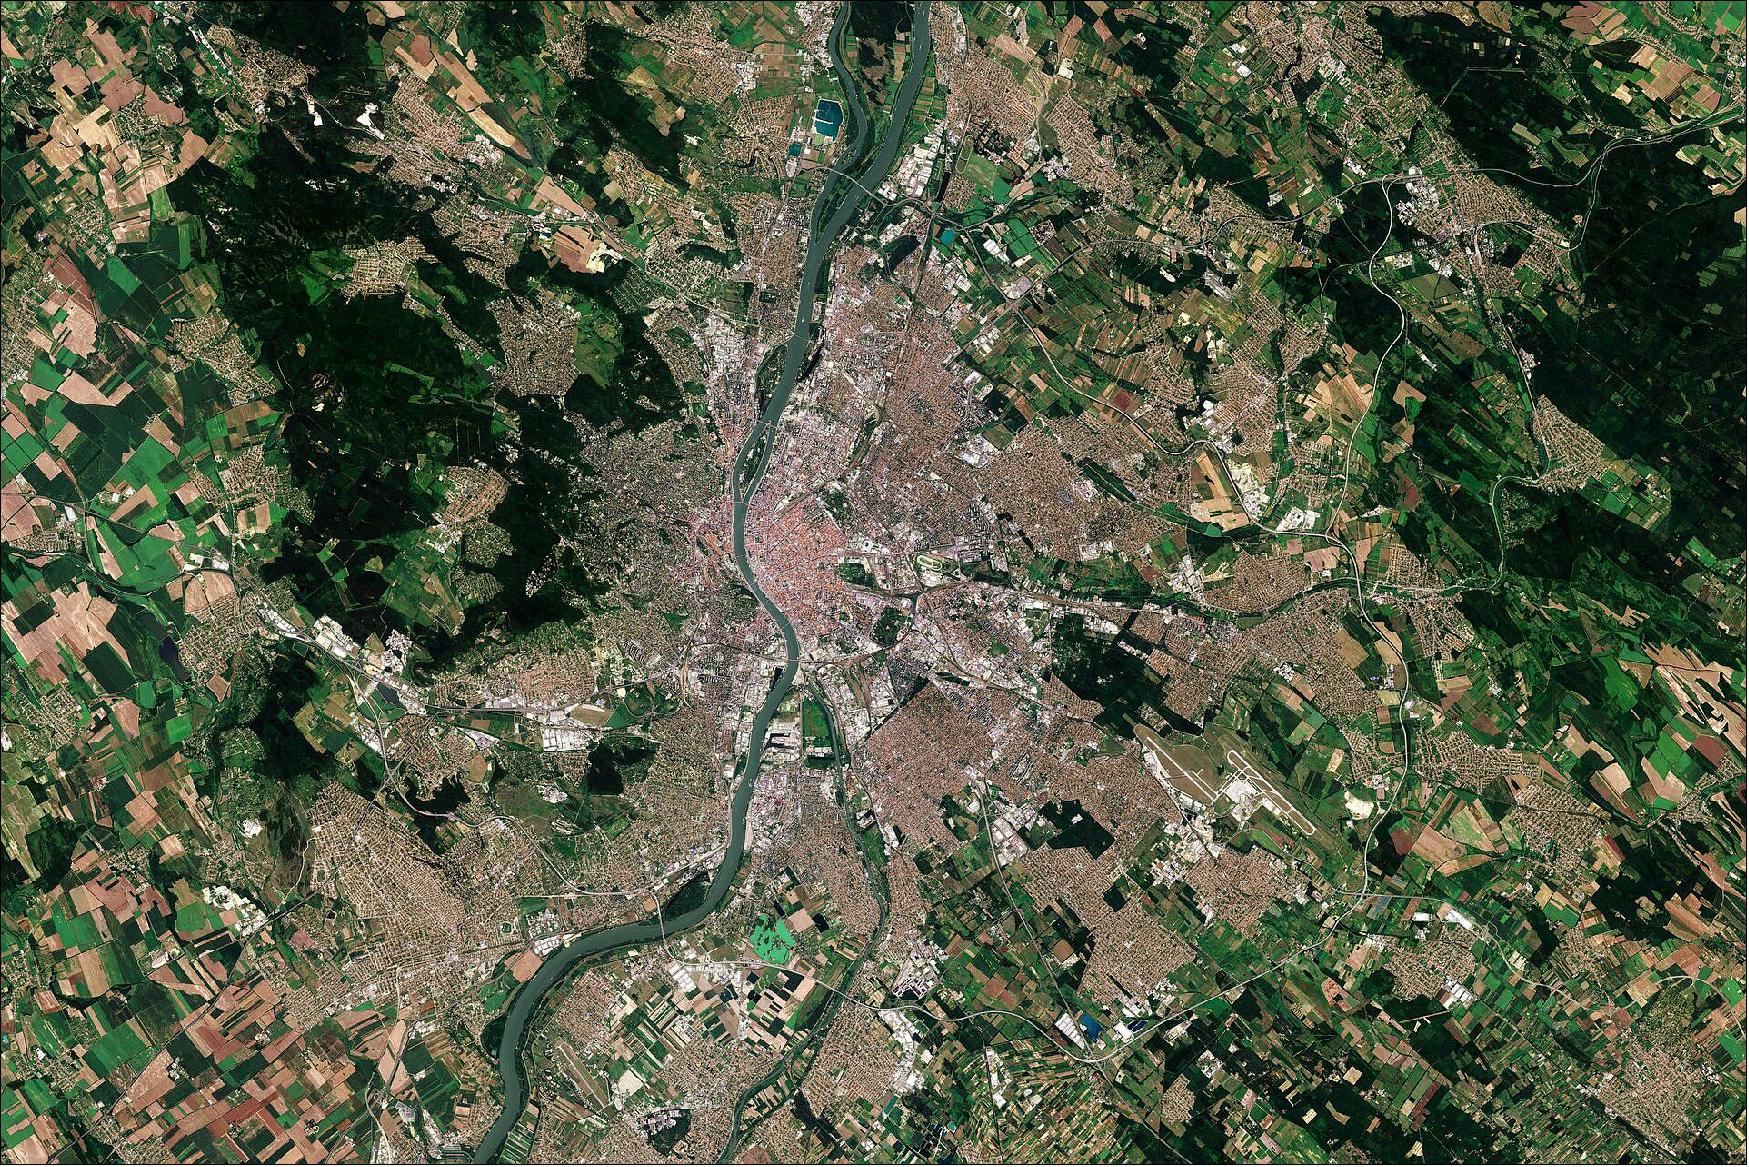 Figure 17: Budapest, which covers an area of around 525 km2, lies at the center of the Carpathian Basin, in central Hungary. In this image, captured on 28 July 2020, Budapest appears reddish in color in the center and the city is surrounded by green and beige colored fields. This image is also featured on the Earth from Space video program (image credit: ESA)